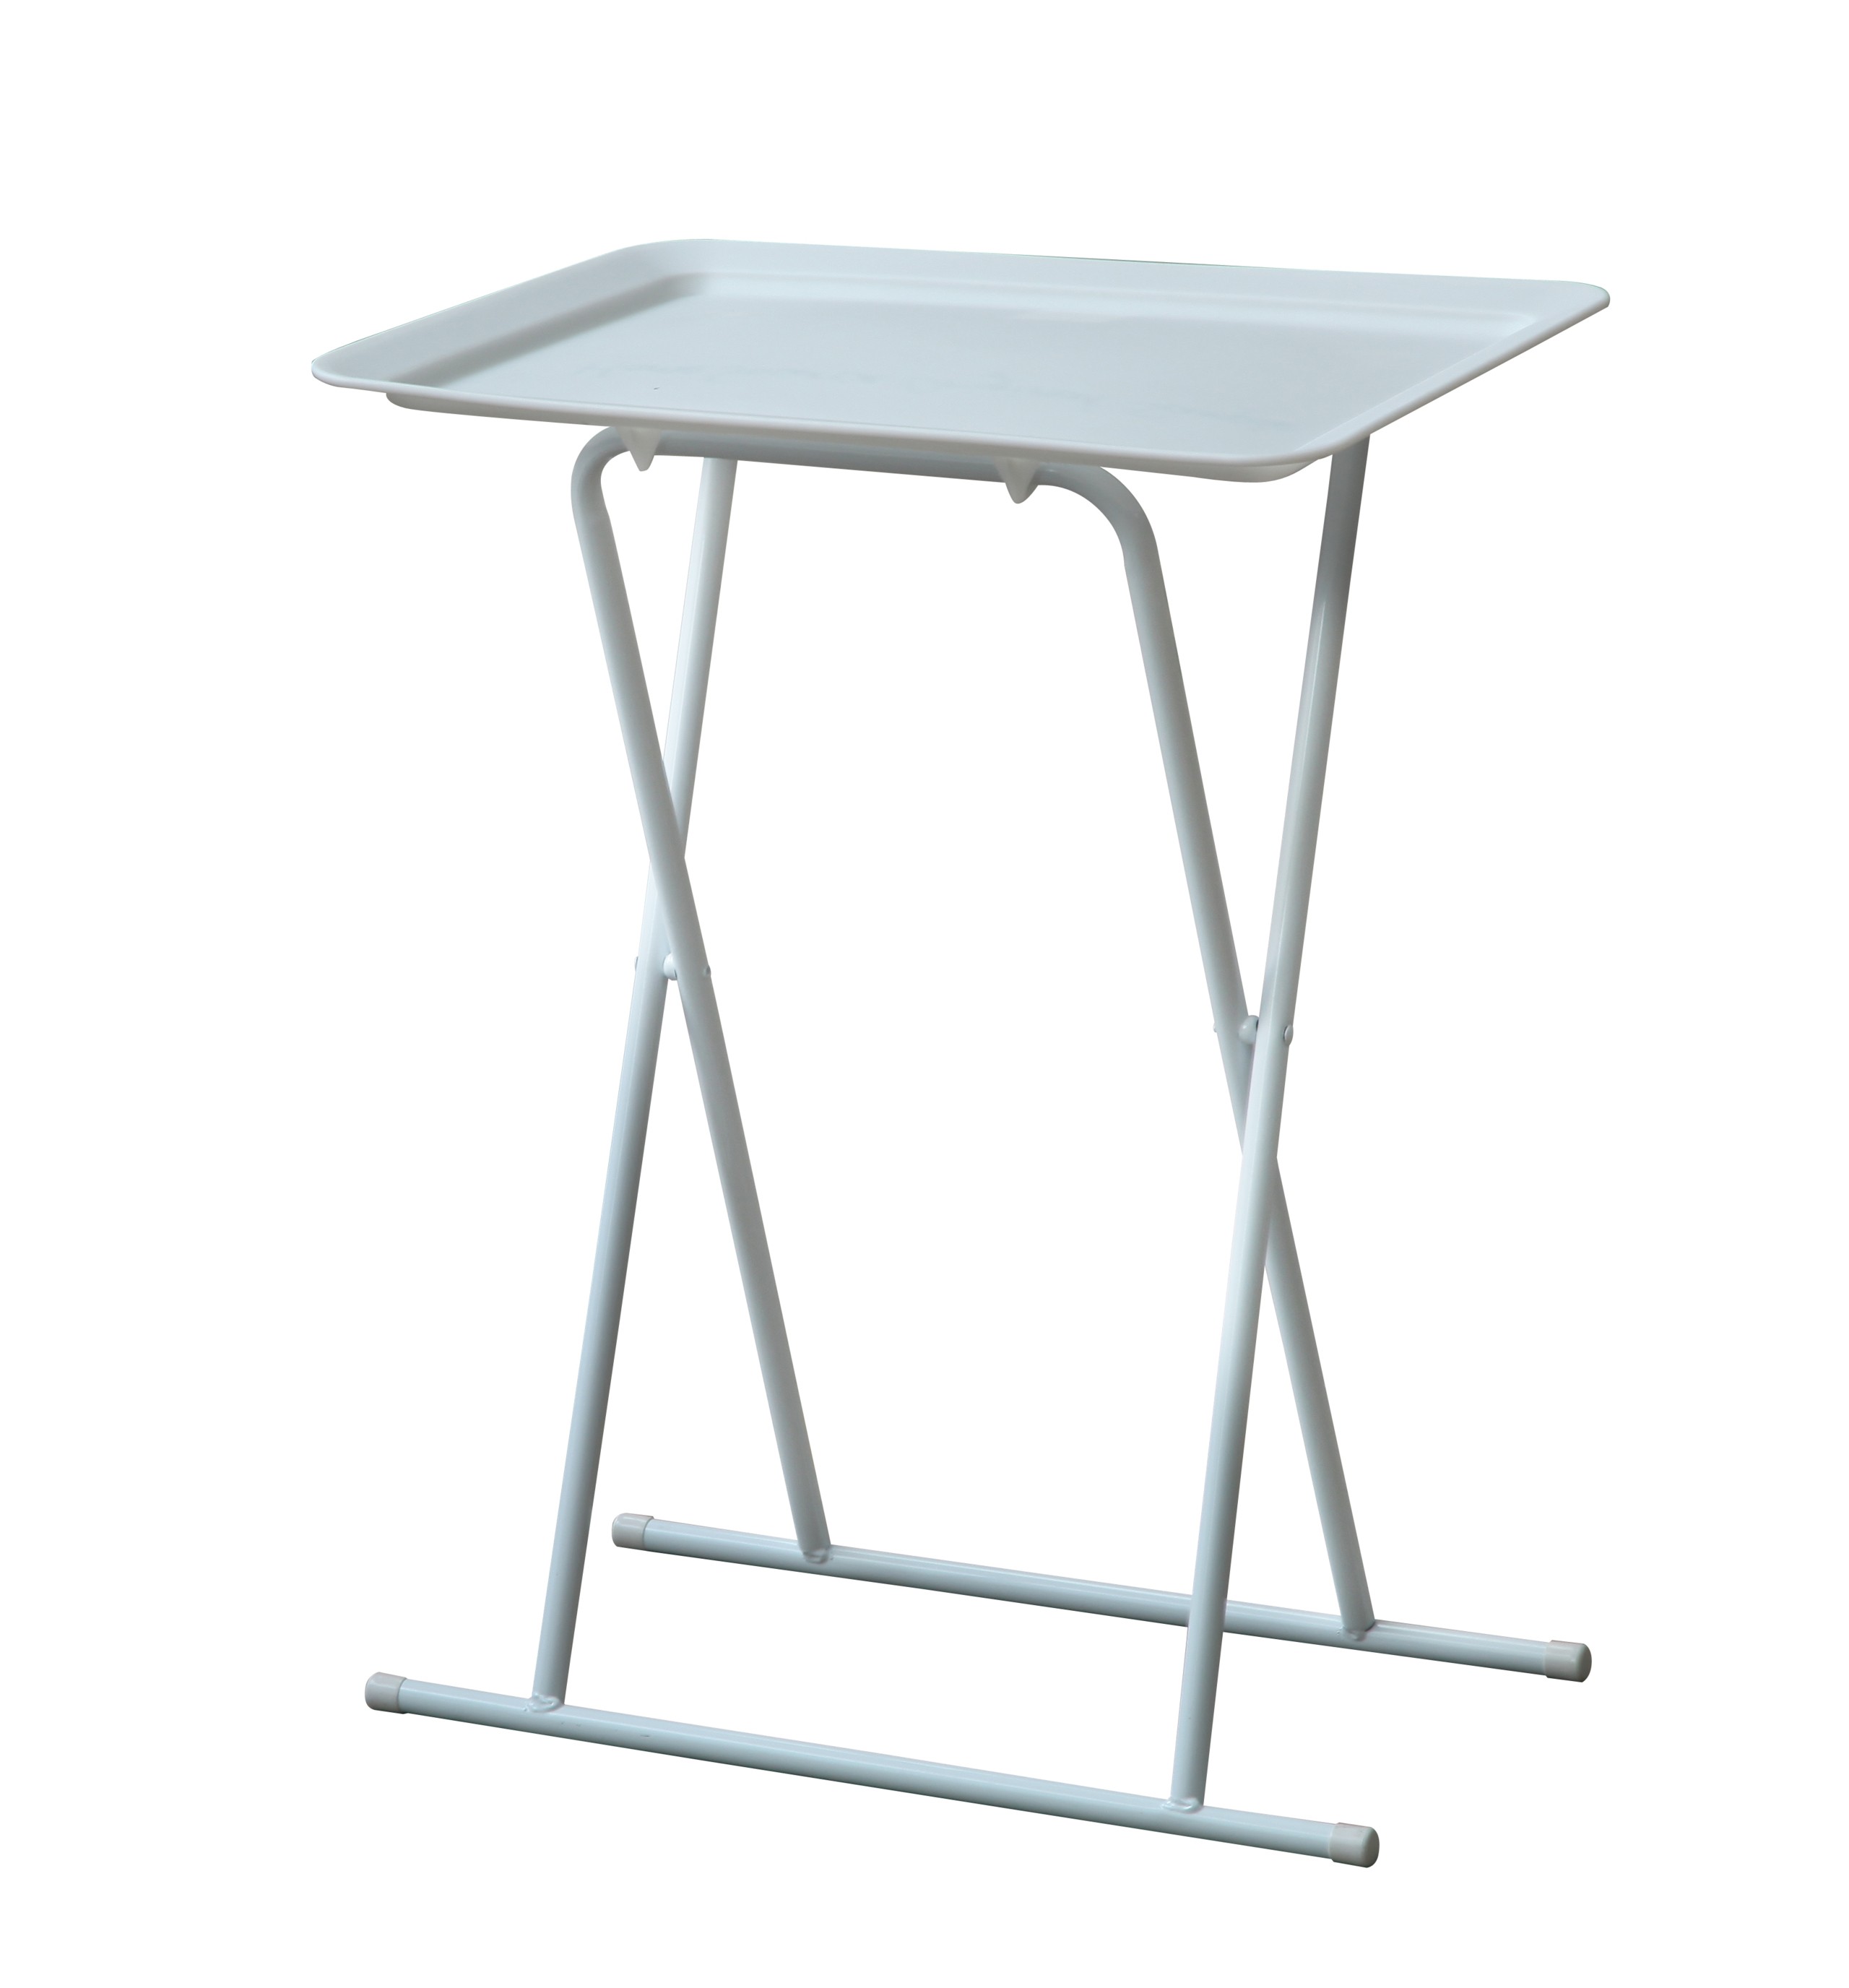 Sturdy Metal Folding Snack Table With Plastic Tray